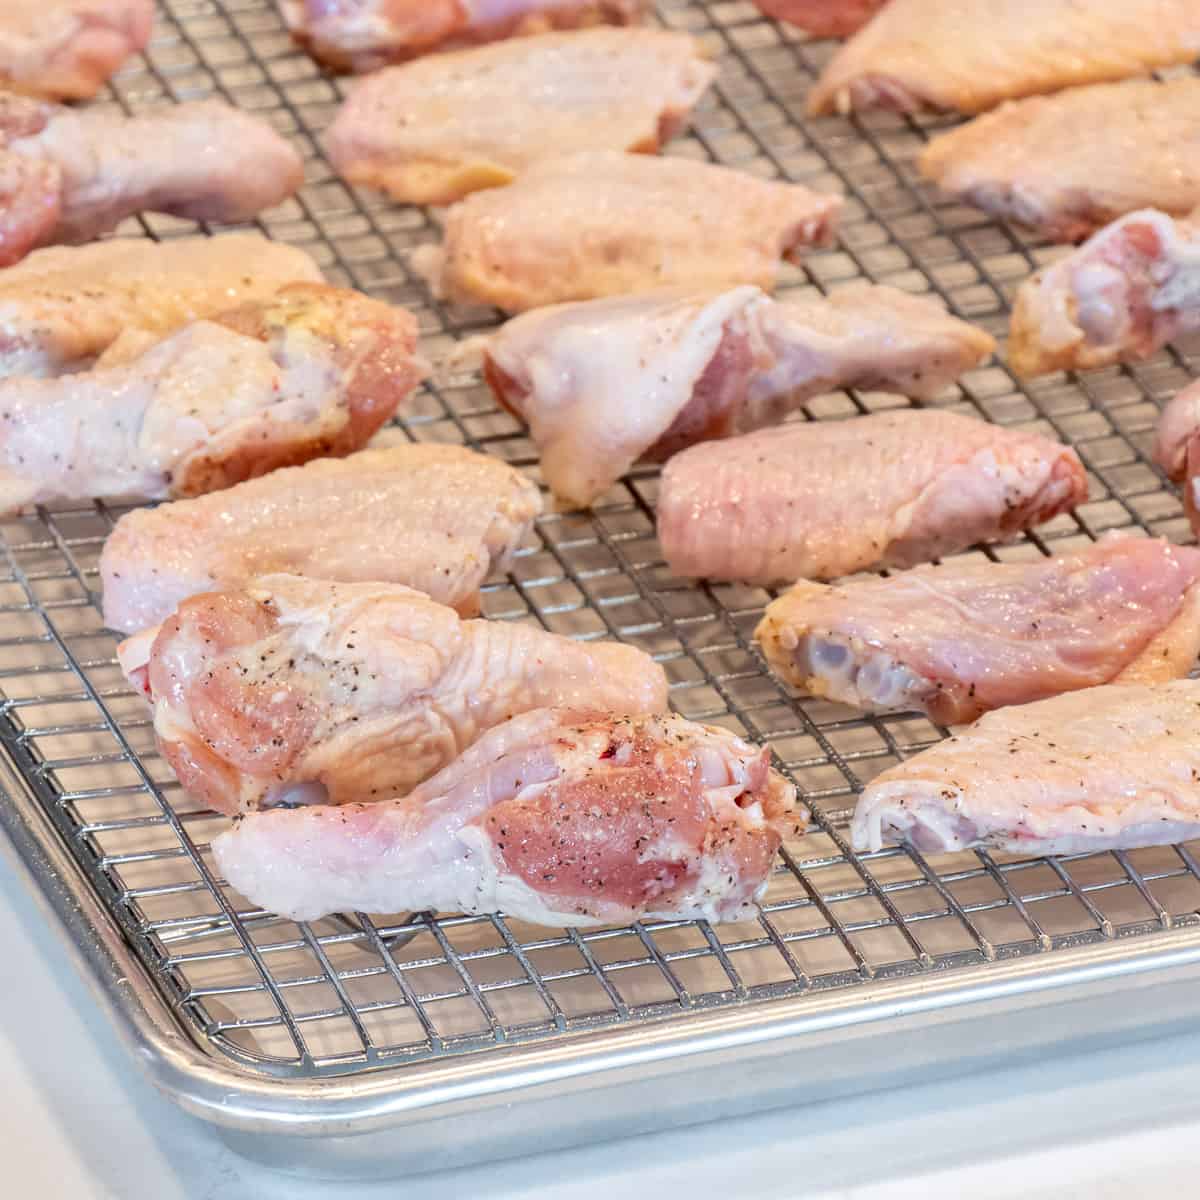 Chicken wings placed on a rack and ready to go in the oven.